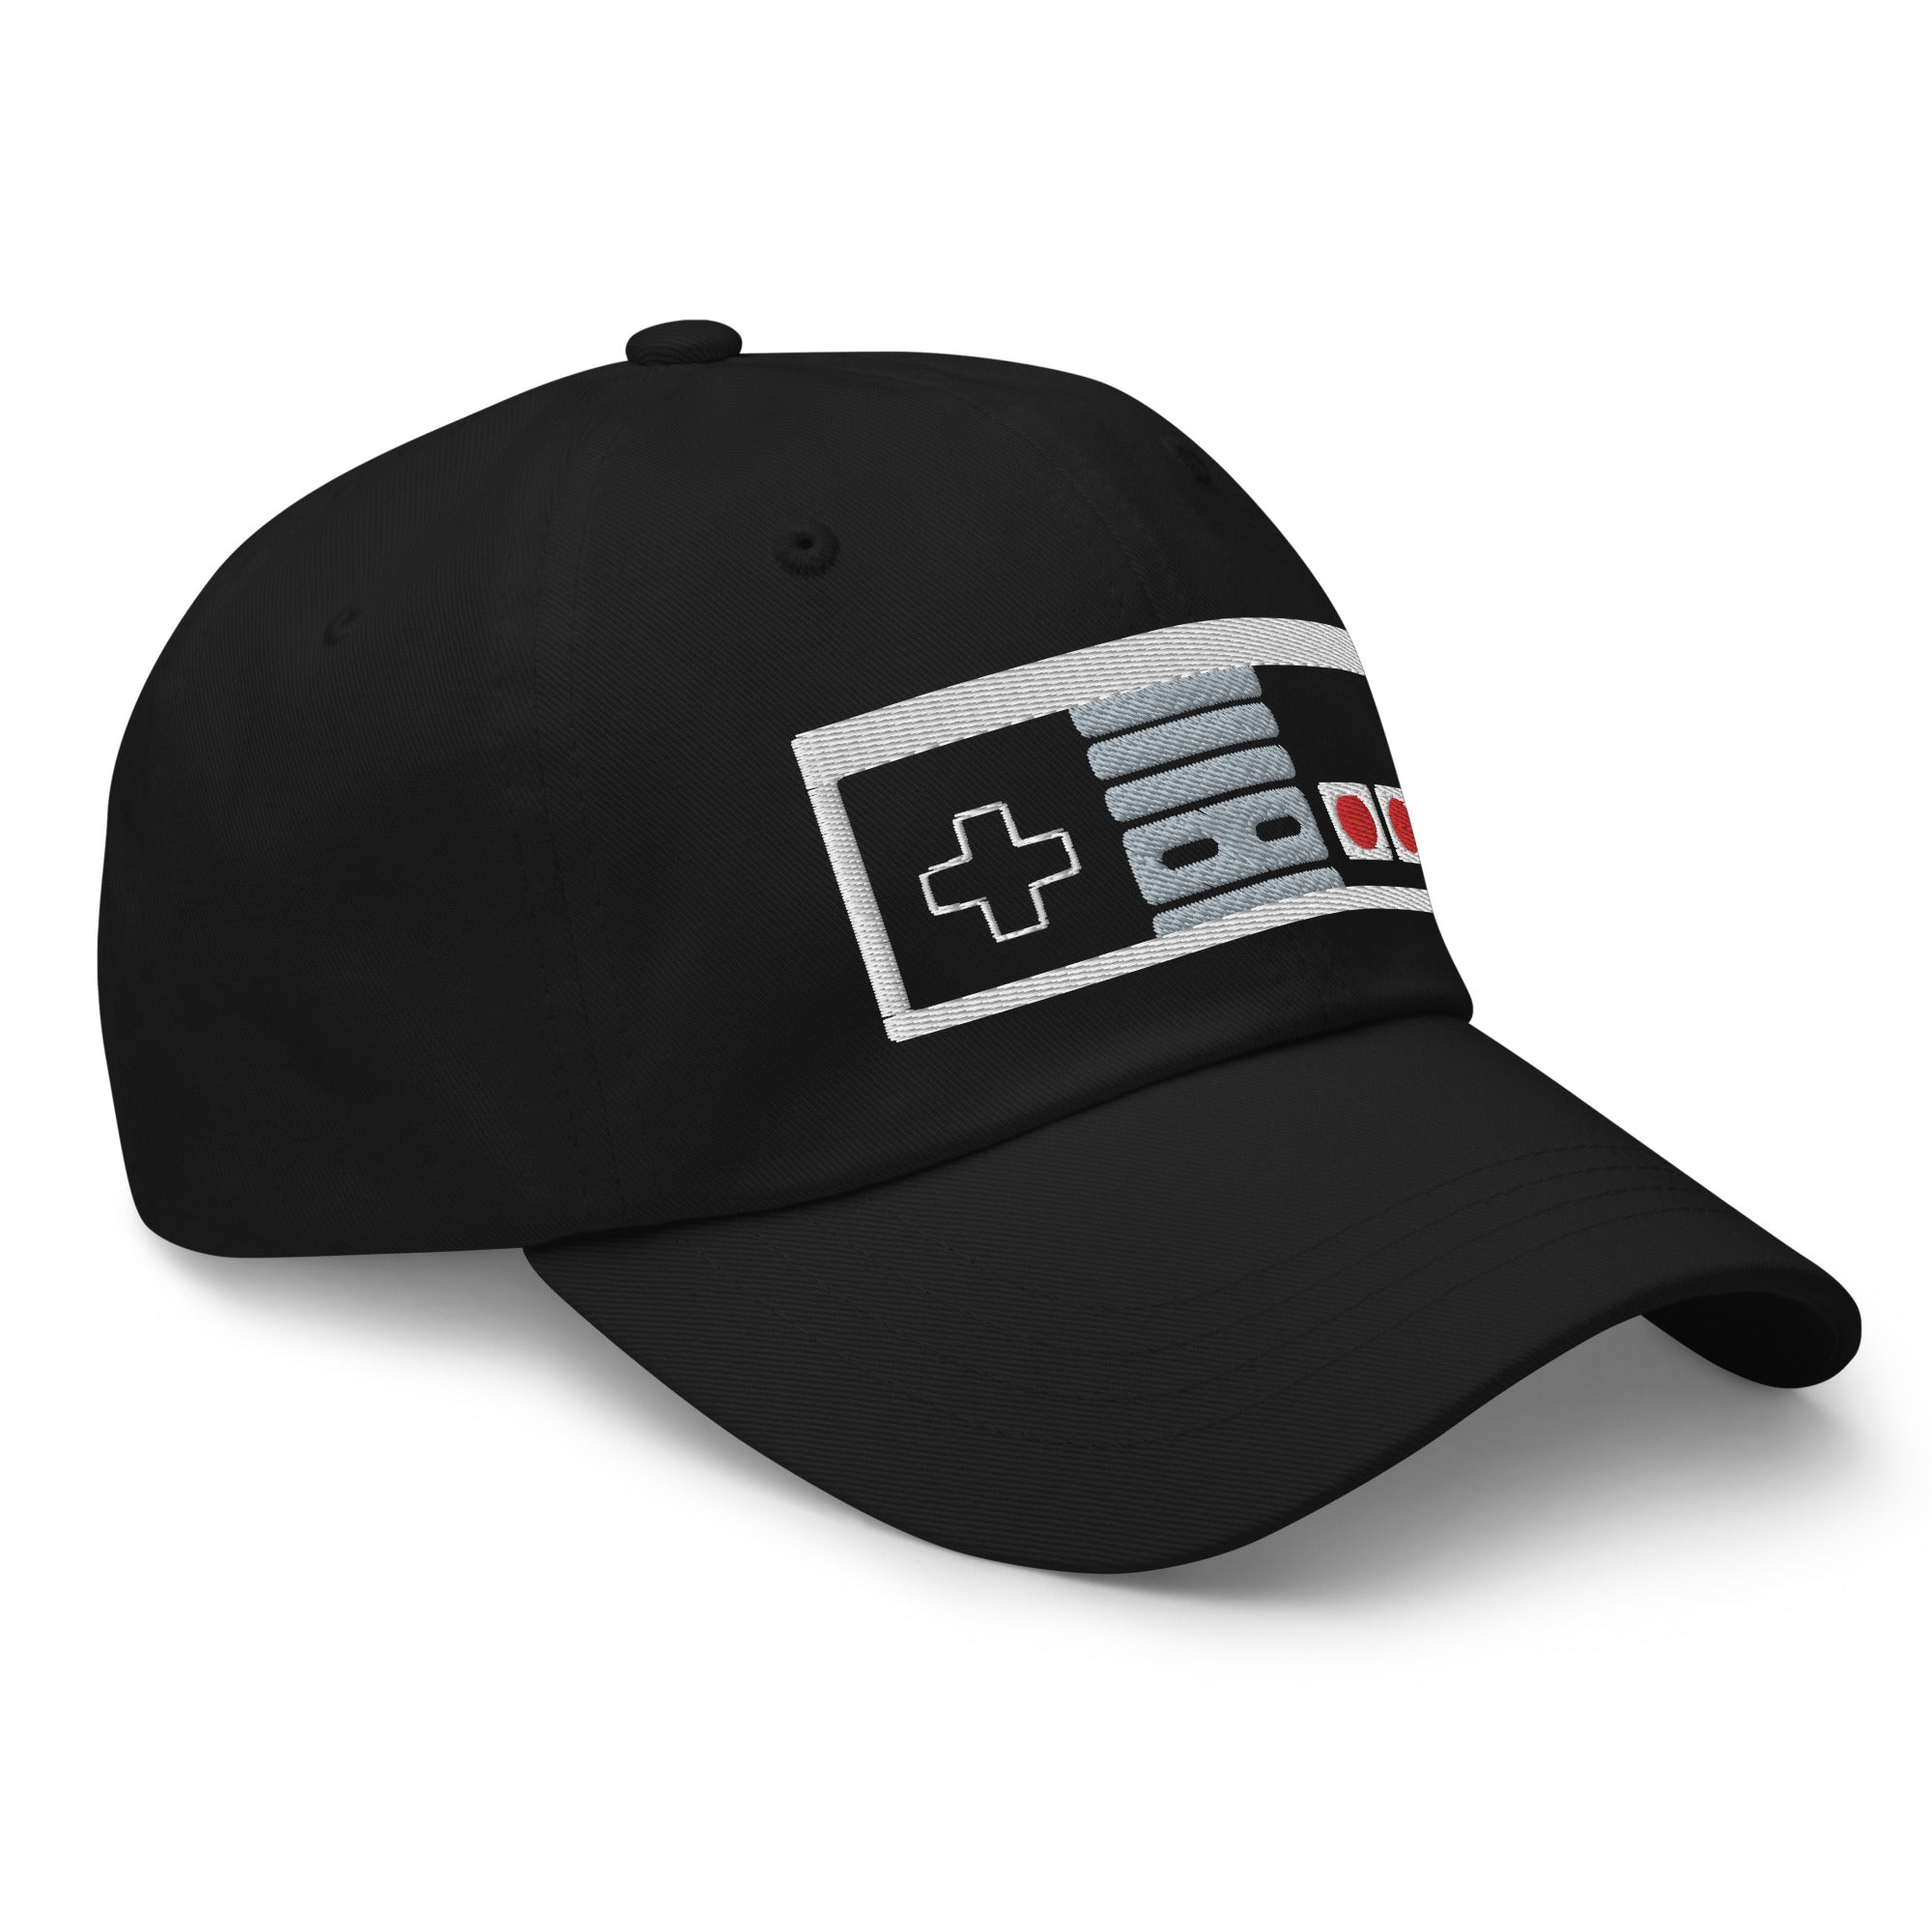 Classic NES Controller Embroidered Baseball Cap Dad hat Super Gaming - Edge of Life Designs